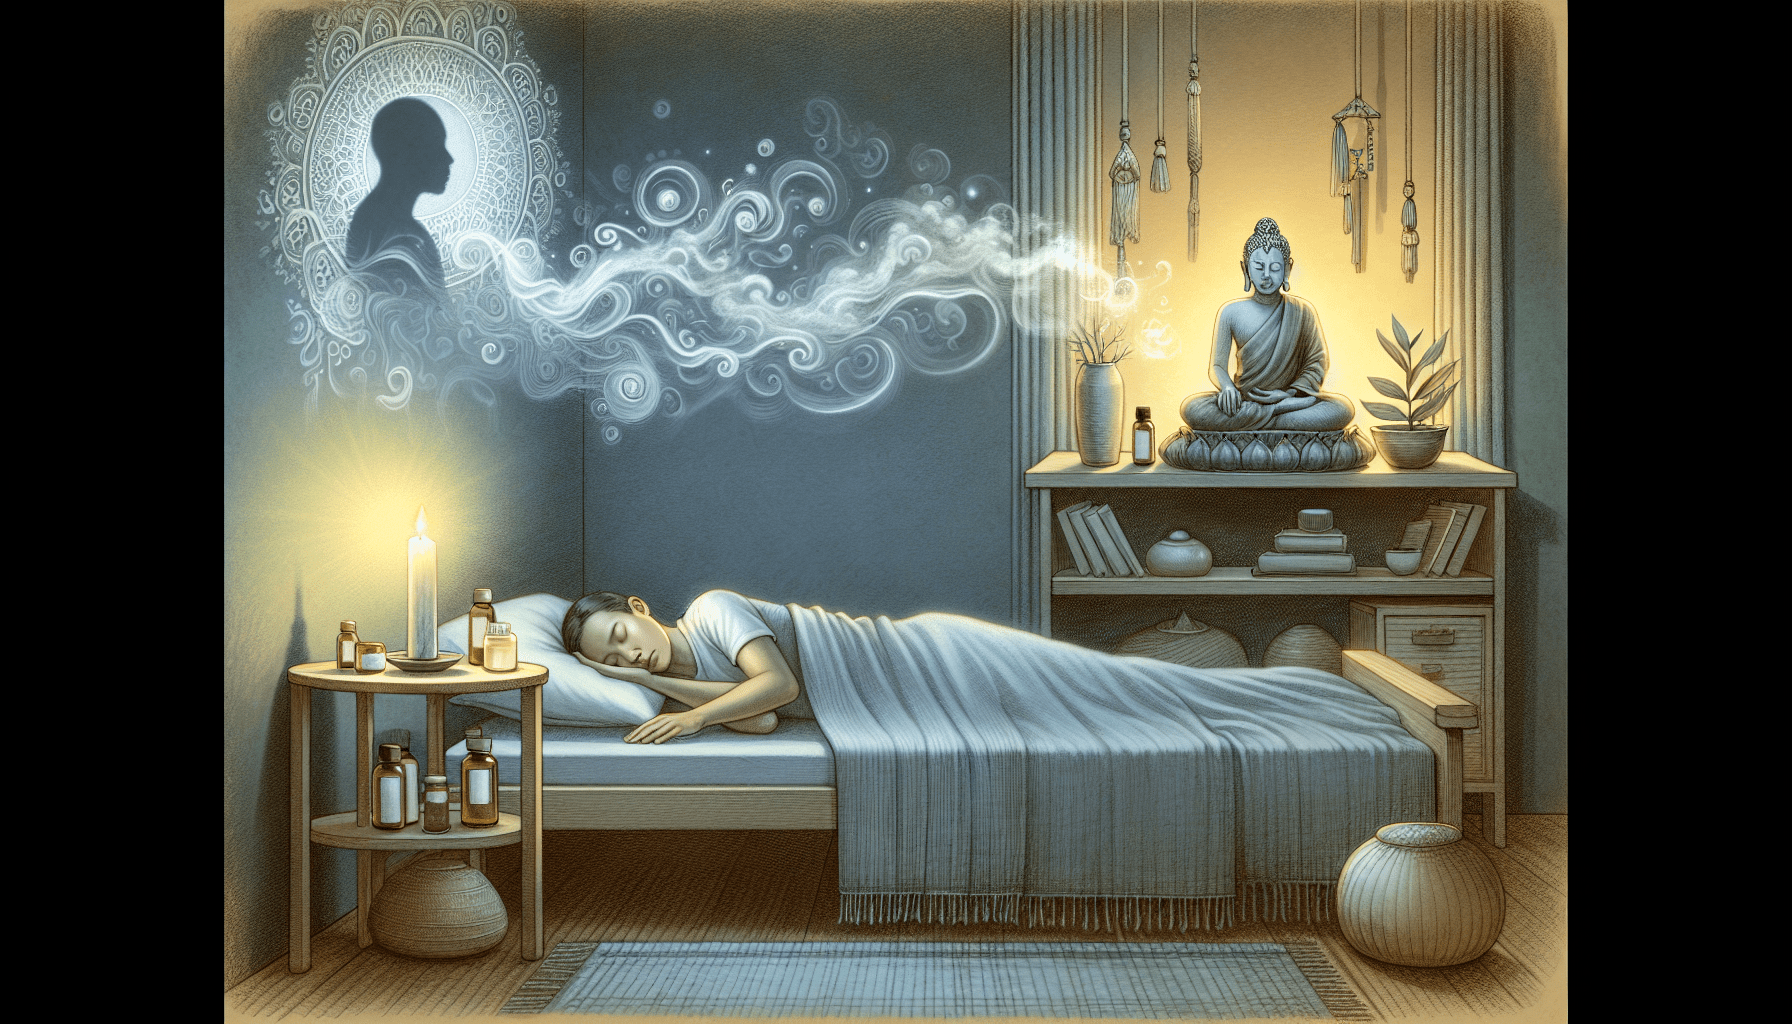 Most Popular Alternative Therapies For Alleviating Sleep Paralysis Symptoms